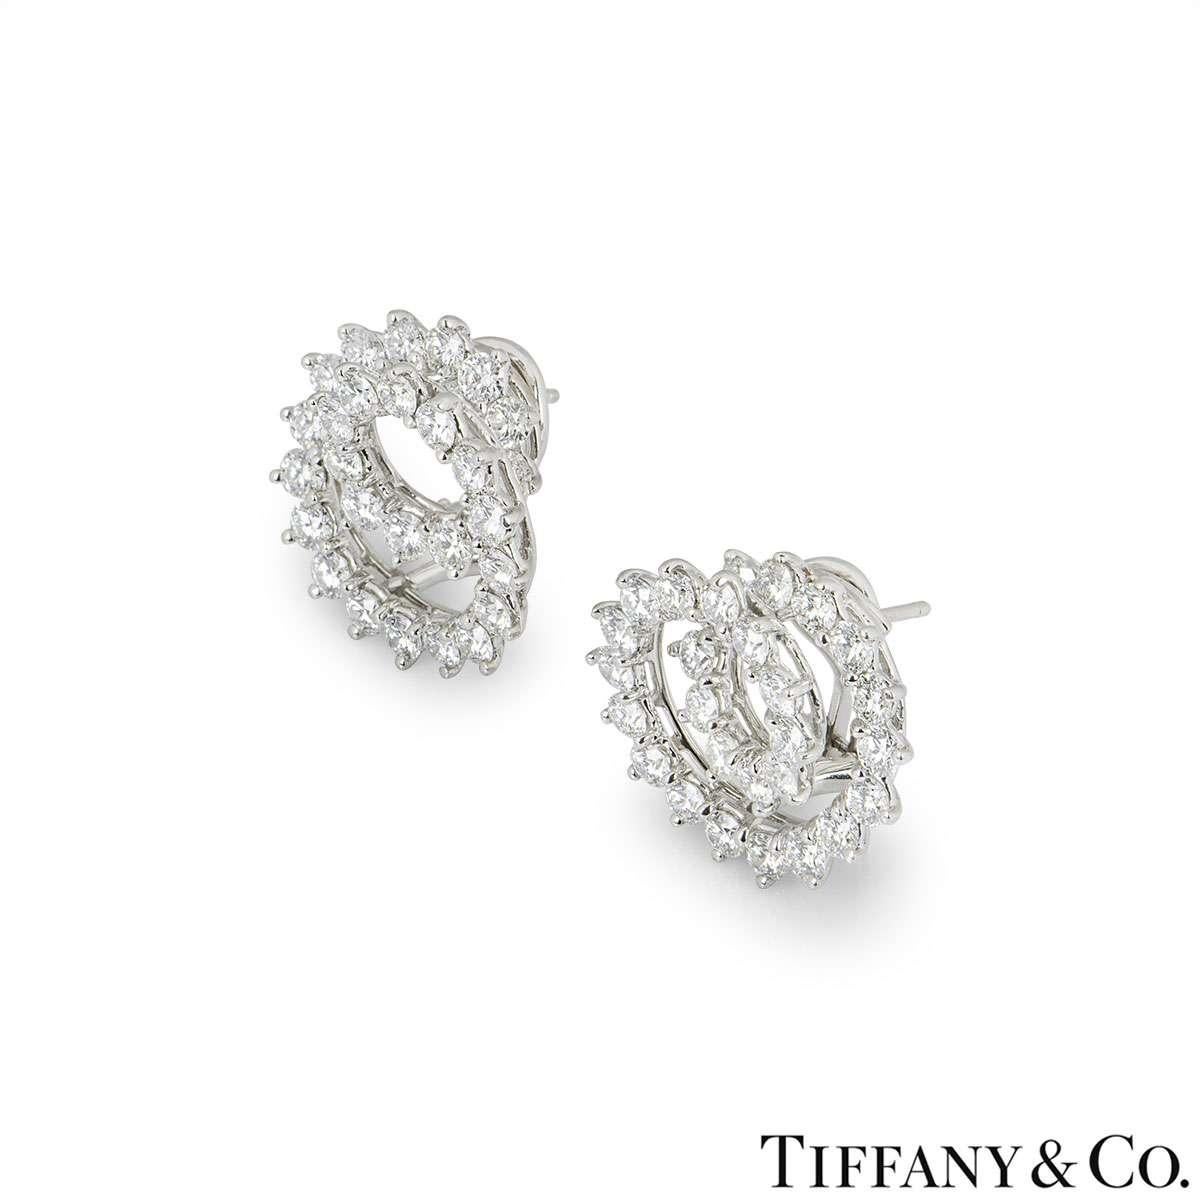 A pair of platinum swirl earrings by Tiffany & Co. The earrings are composed of 56 claw set round brilliant cut diamonds totalling approximately 2.80ct. The diamonds are predominantly G+ colour and VS clarity. The earrings measure 2cm in diameter